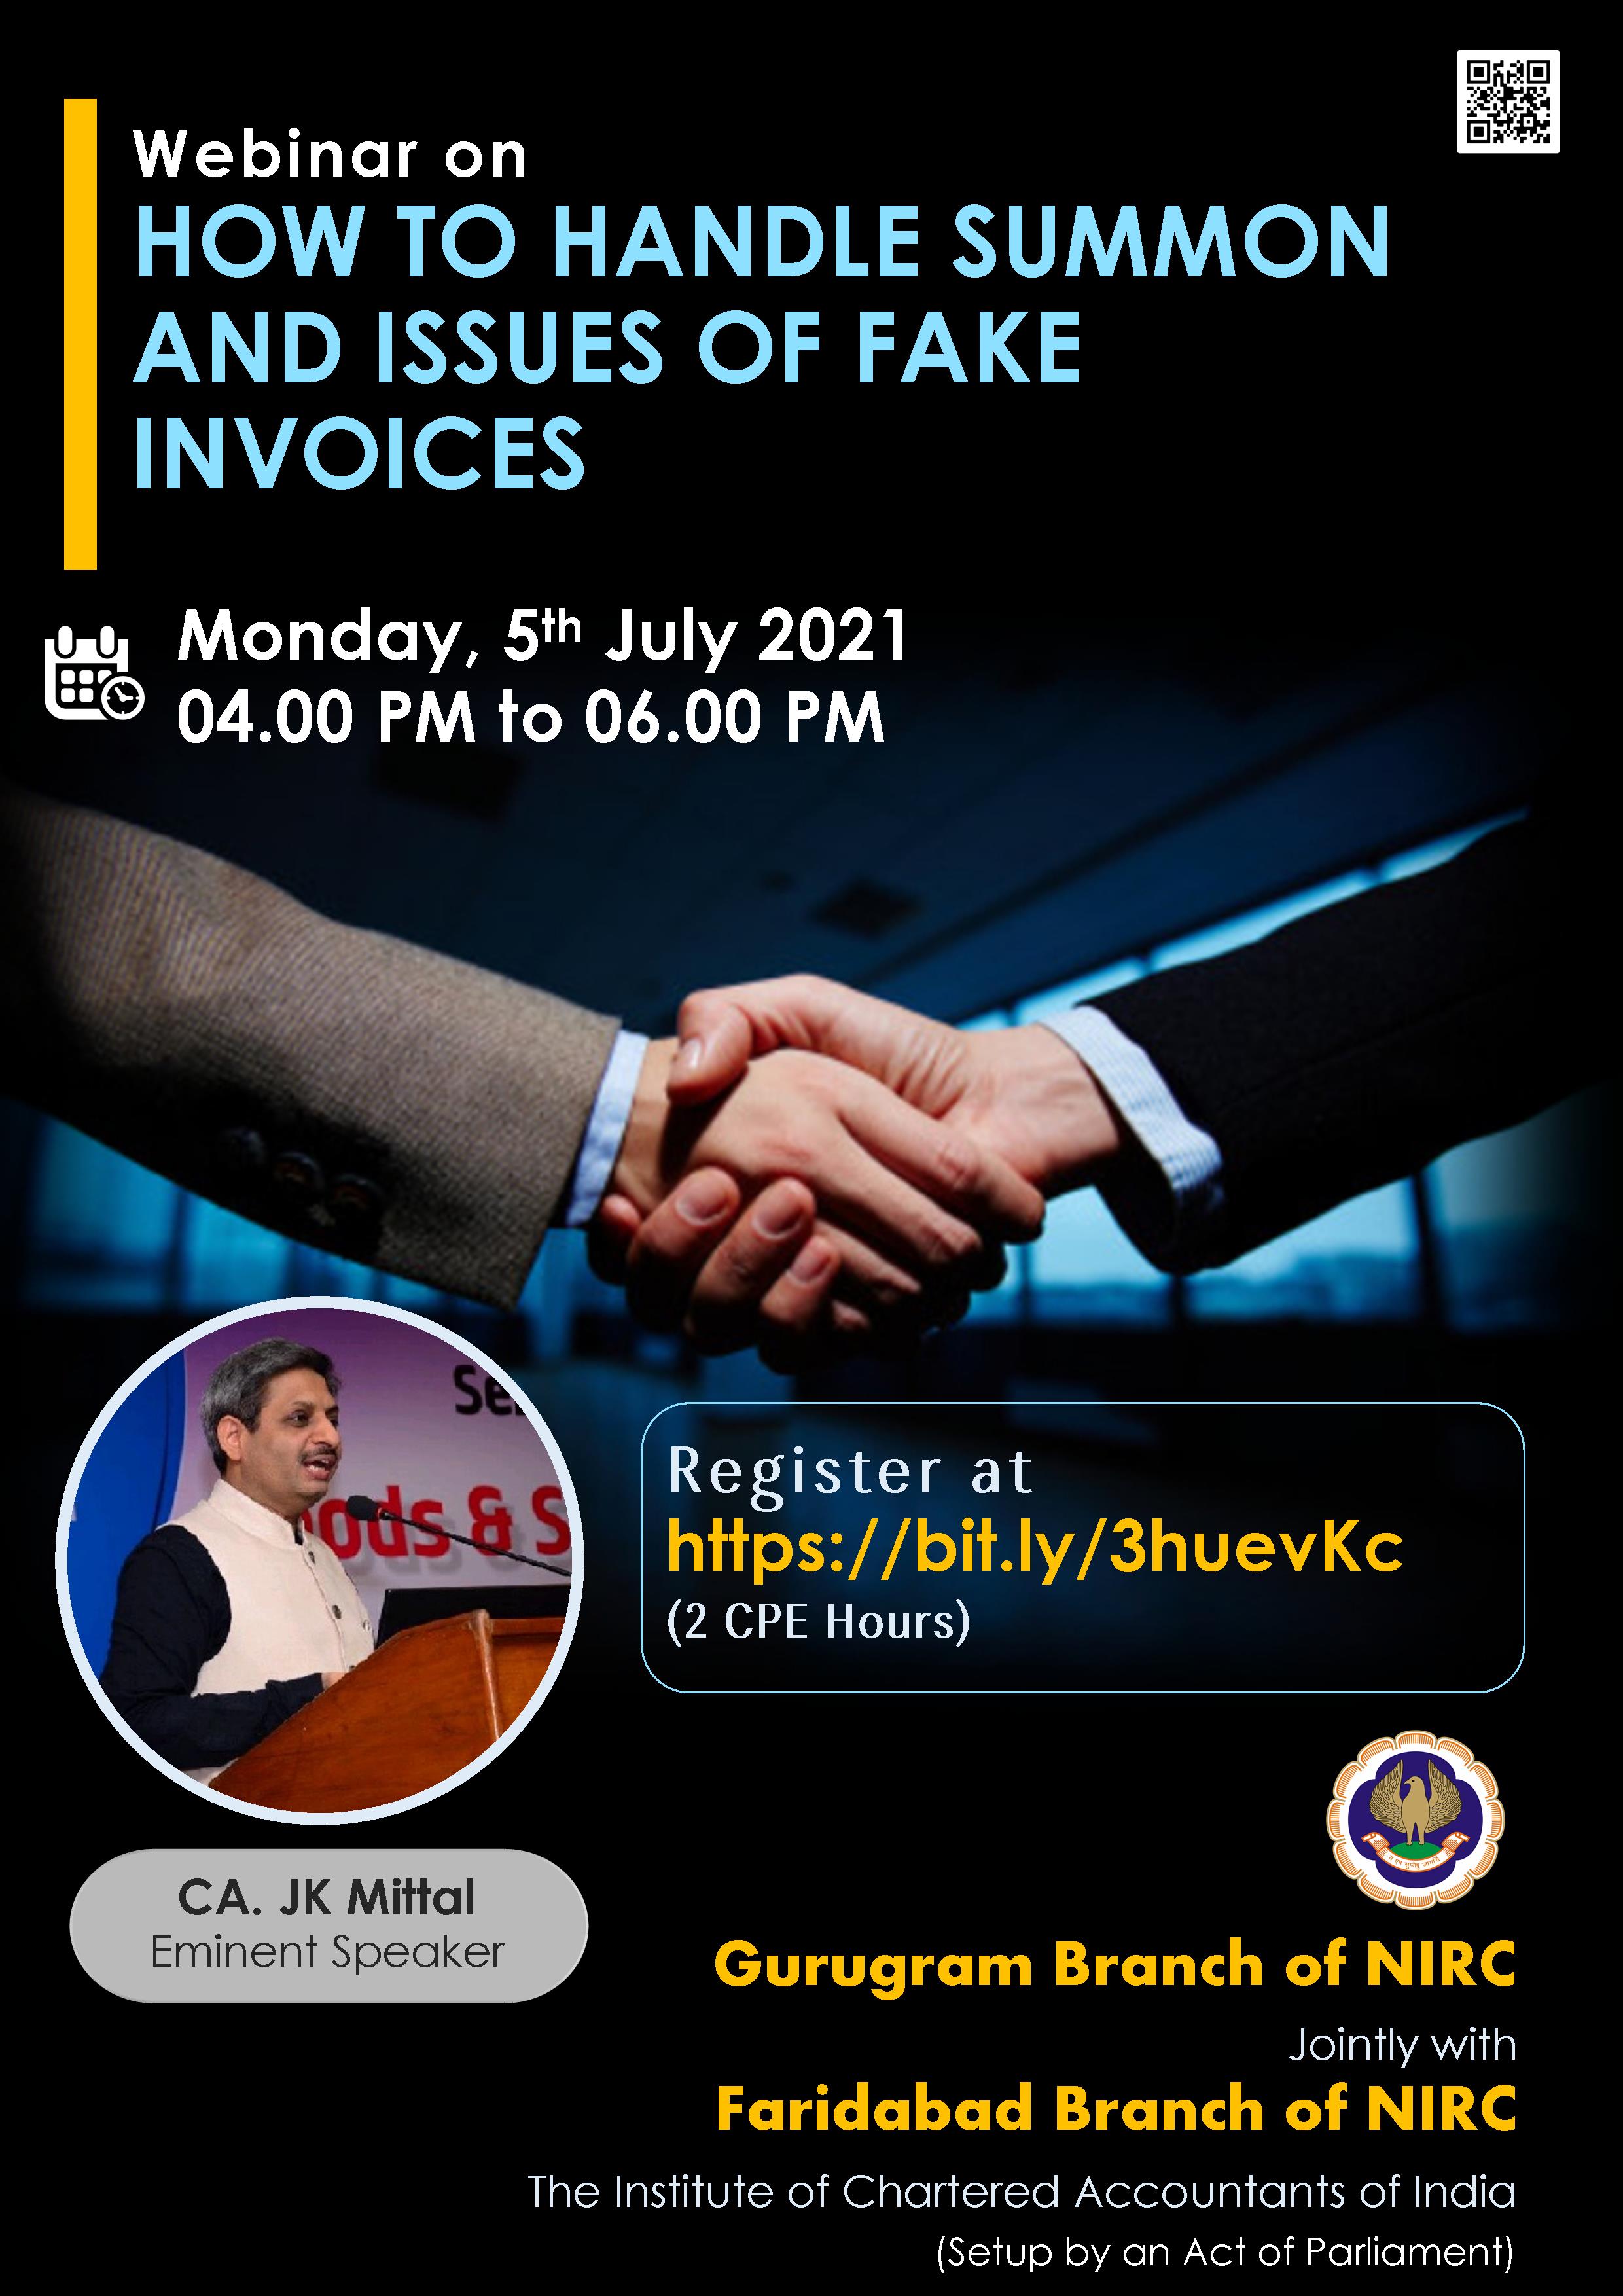 Webinar on HOW TO HANDLE SUMMON AND ISSUES OF FAKE INVOICES